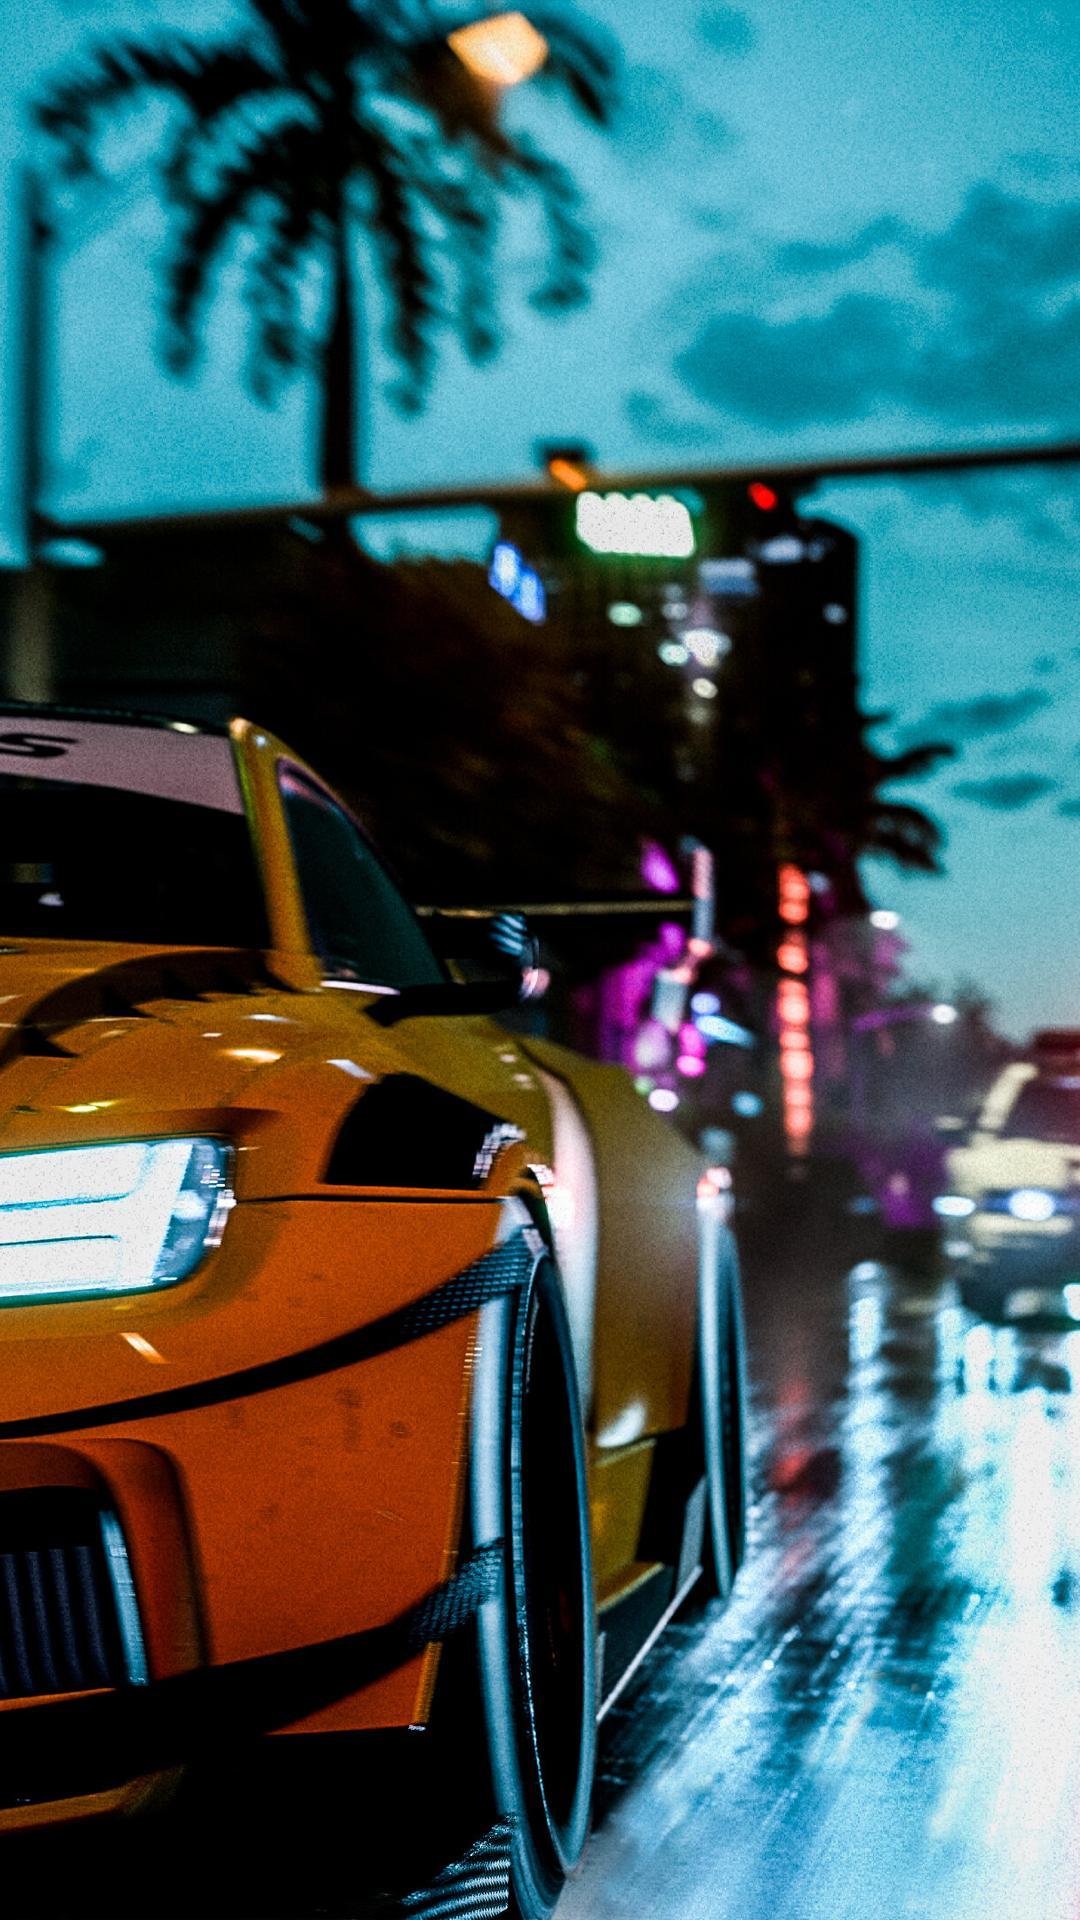 NFS HD Android Wallpapers - Wallpaper Cave